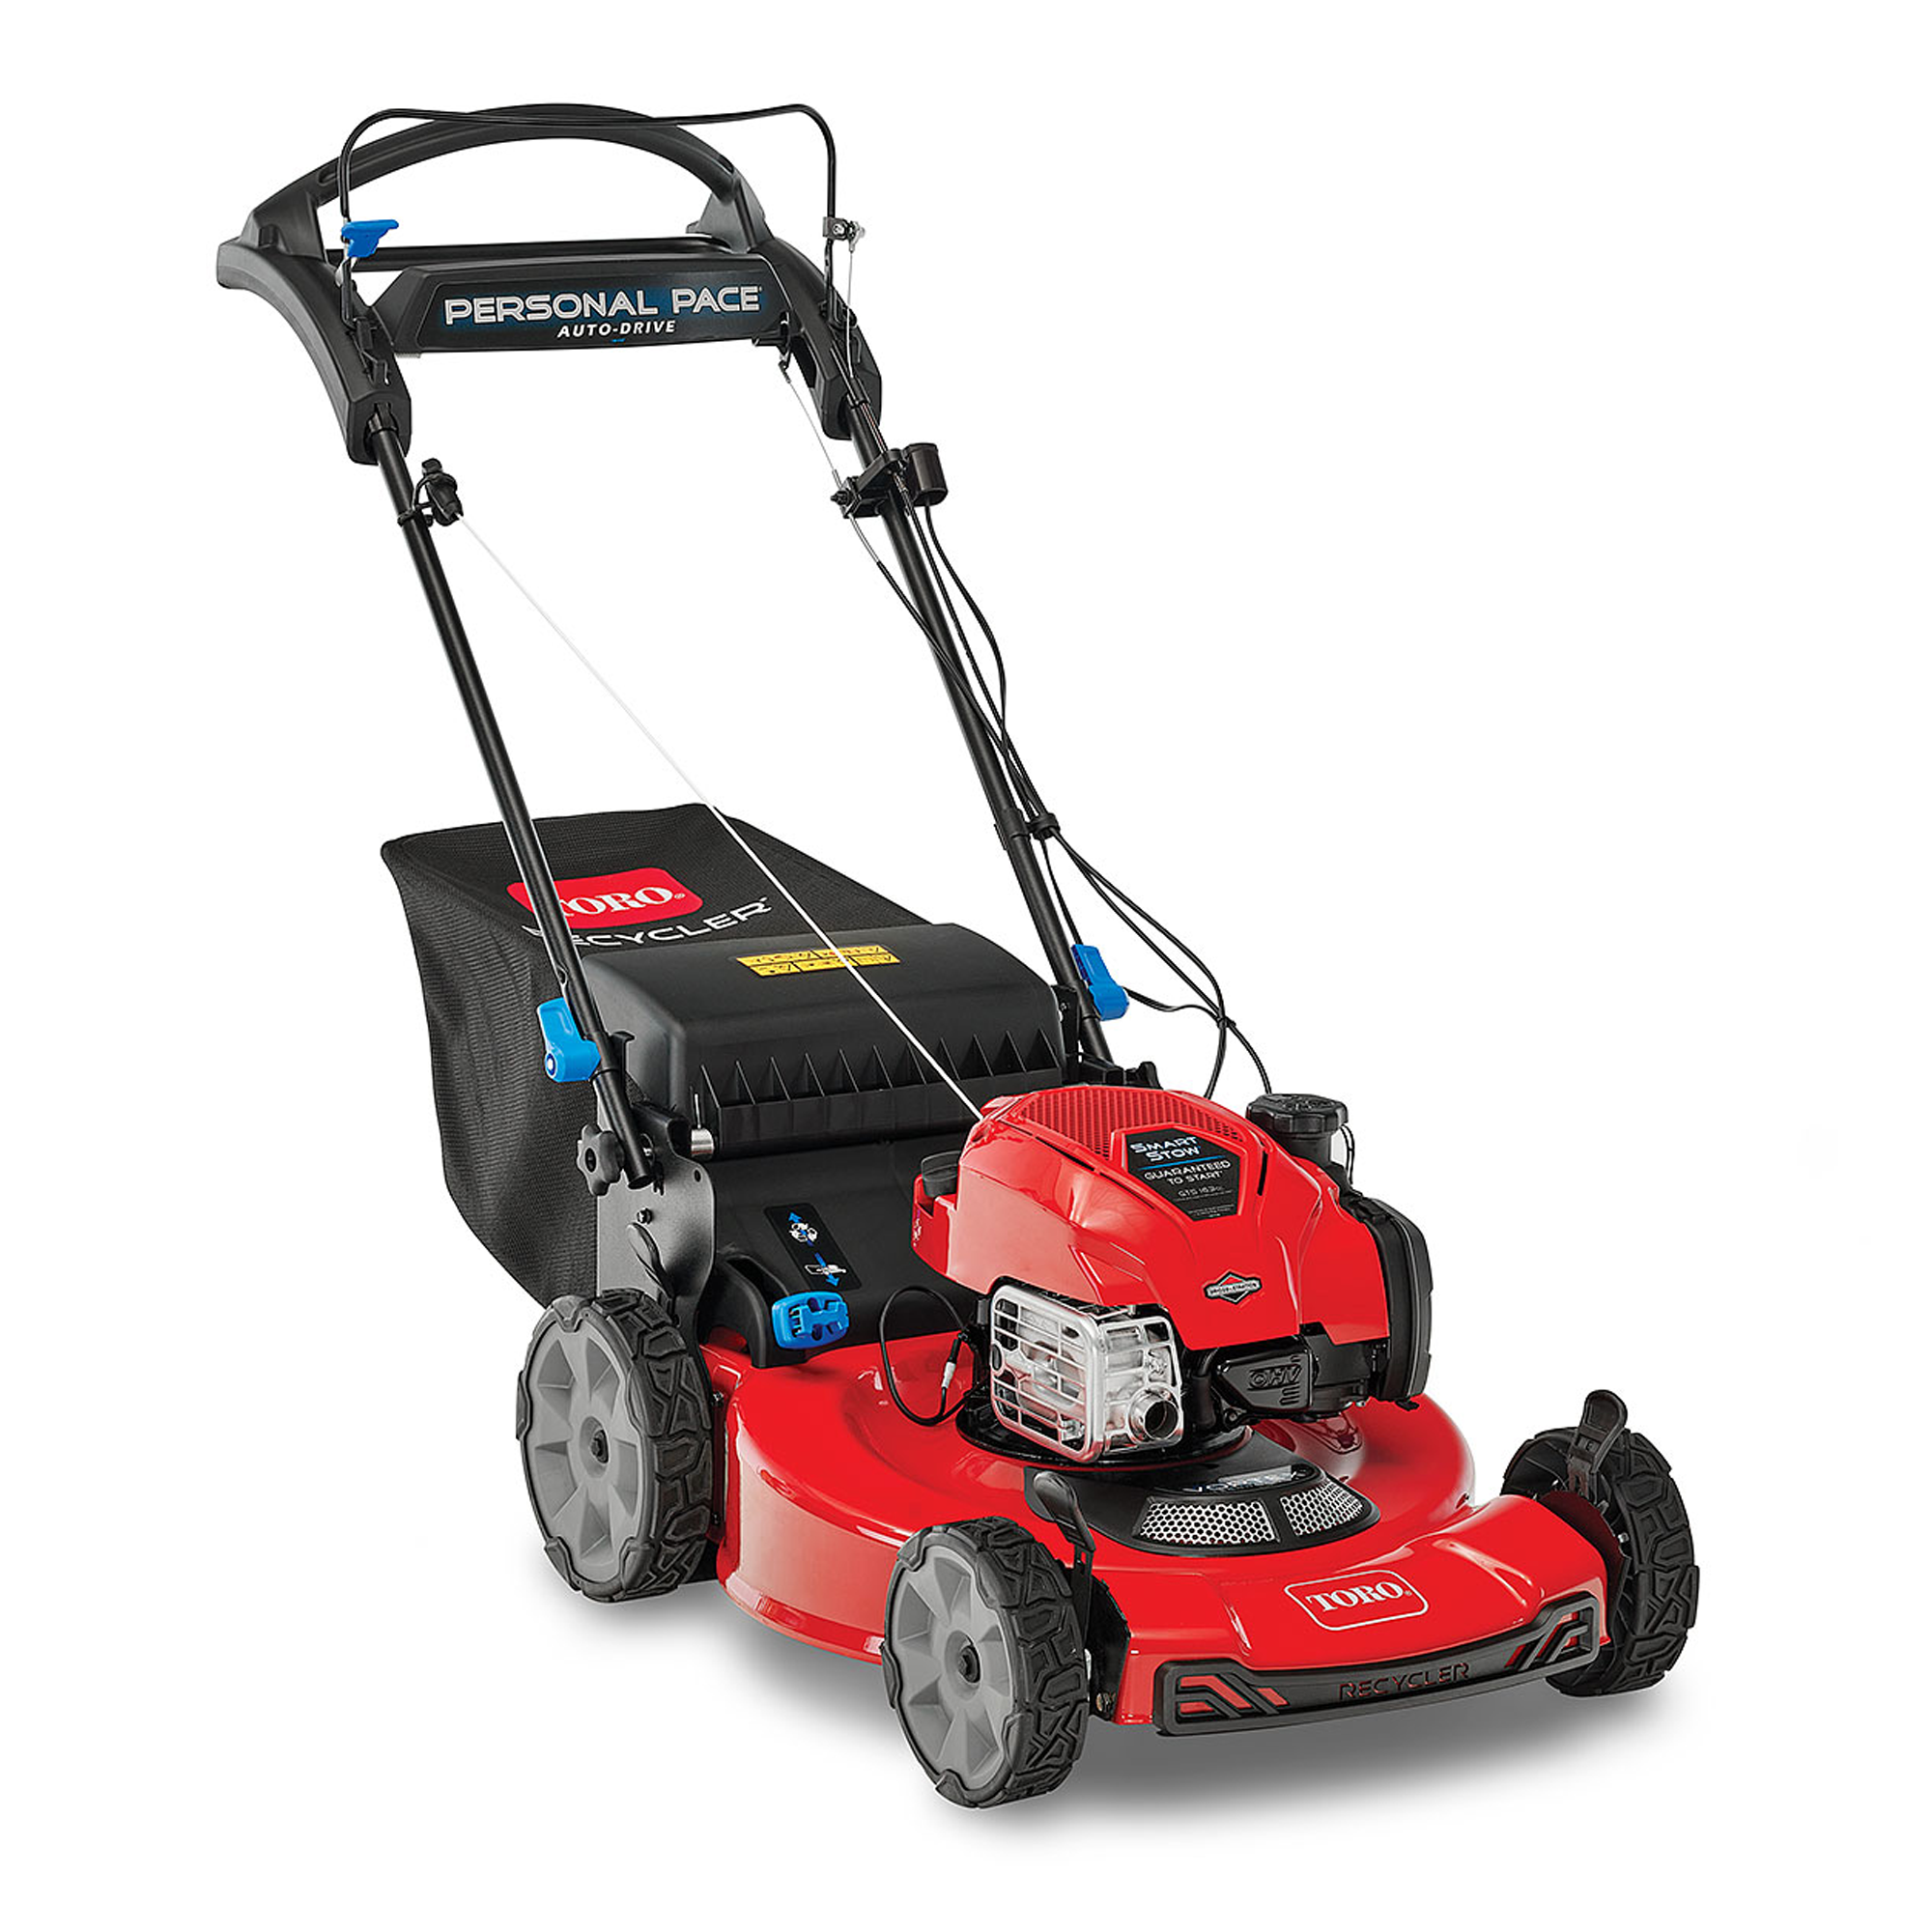 Lawn Mowers, Gas & Electric Lawn Mowers for Homeowners, Toro